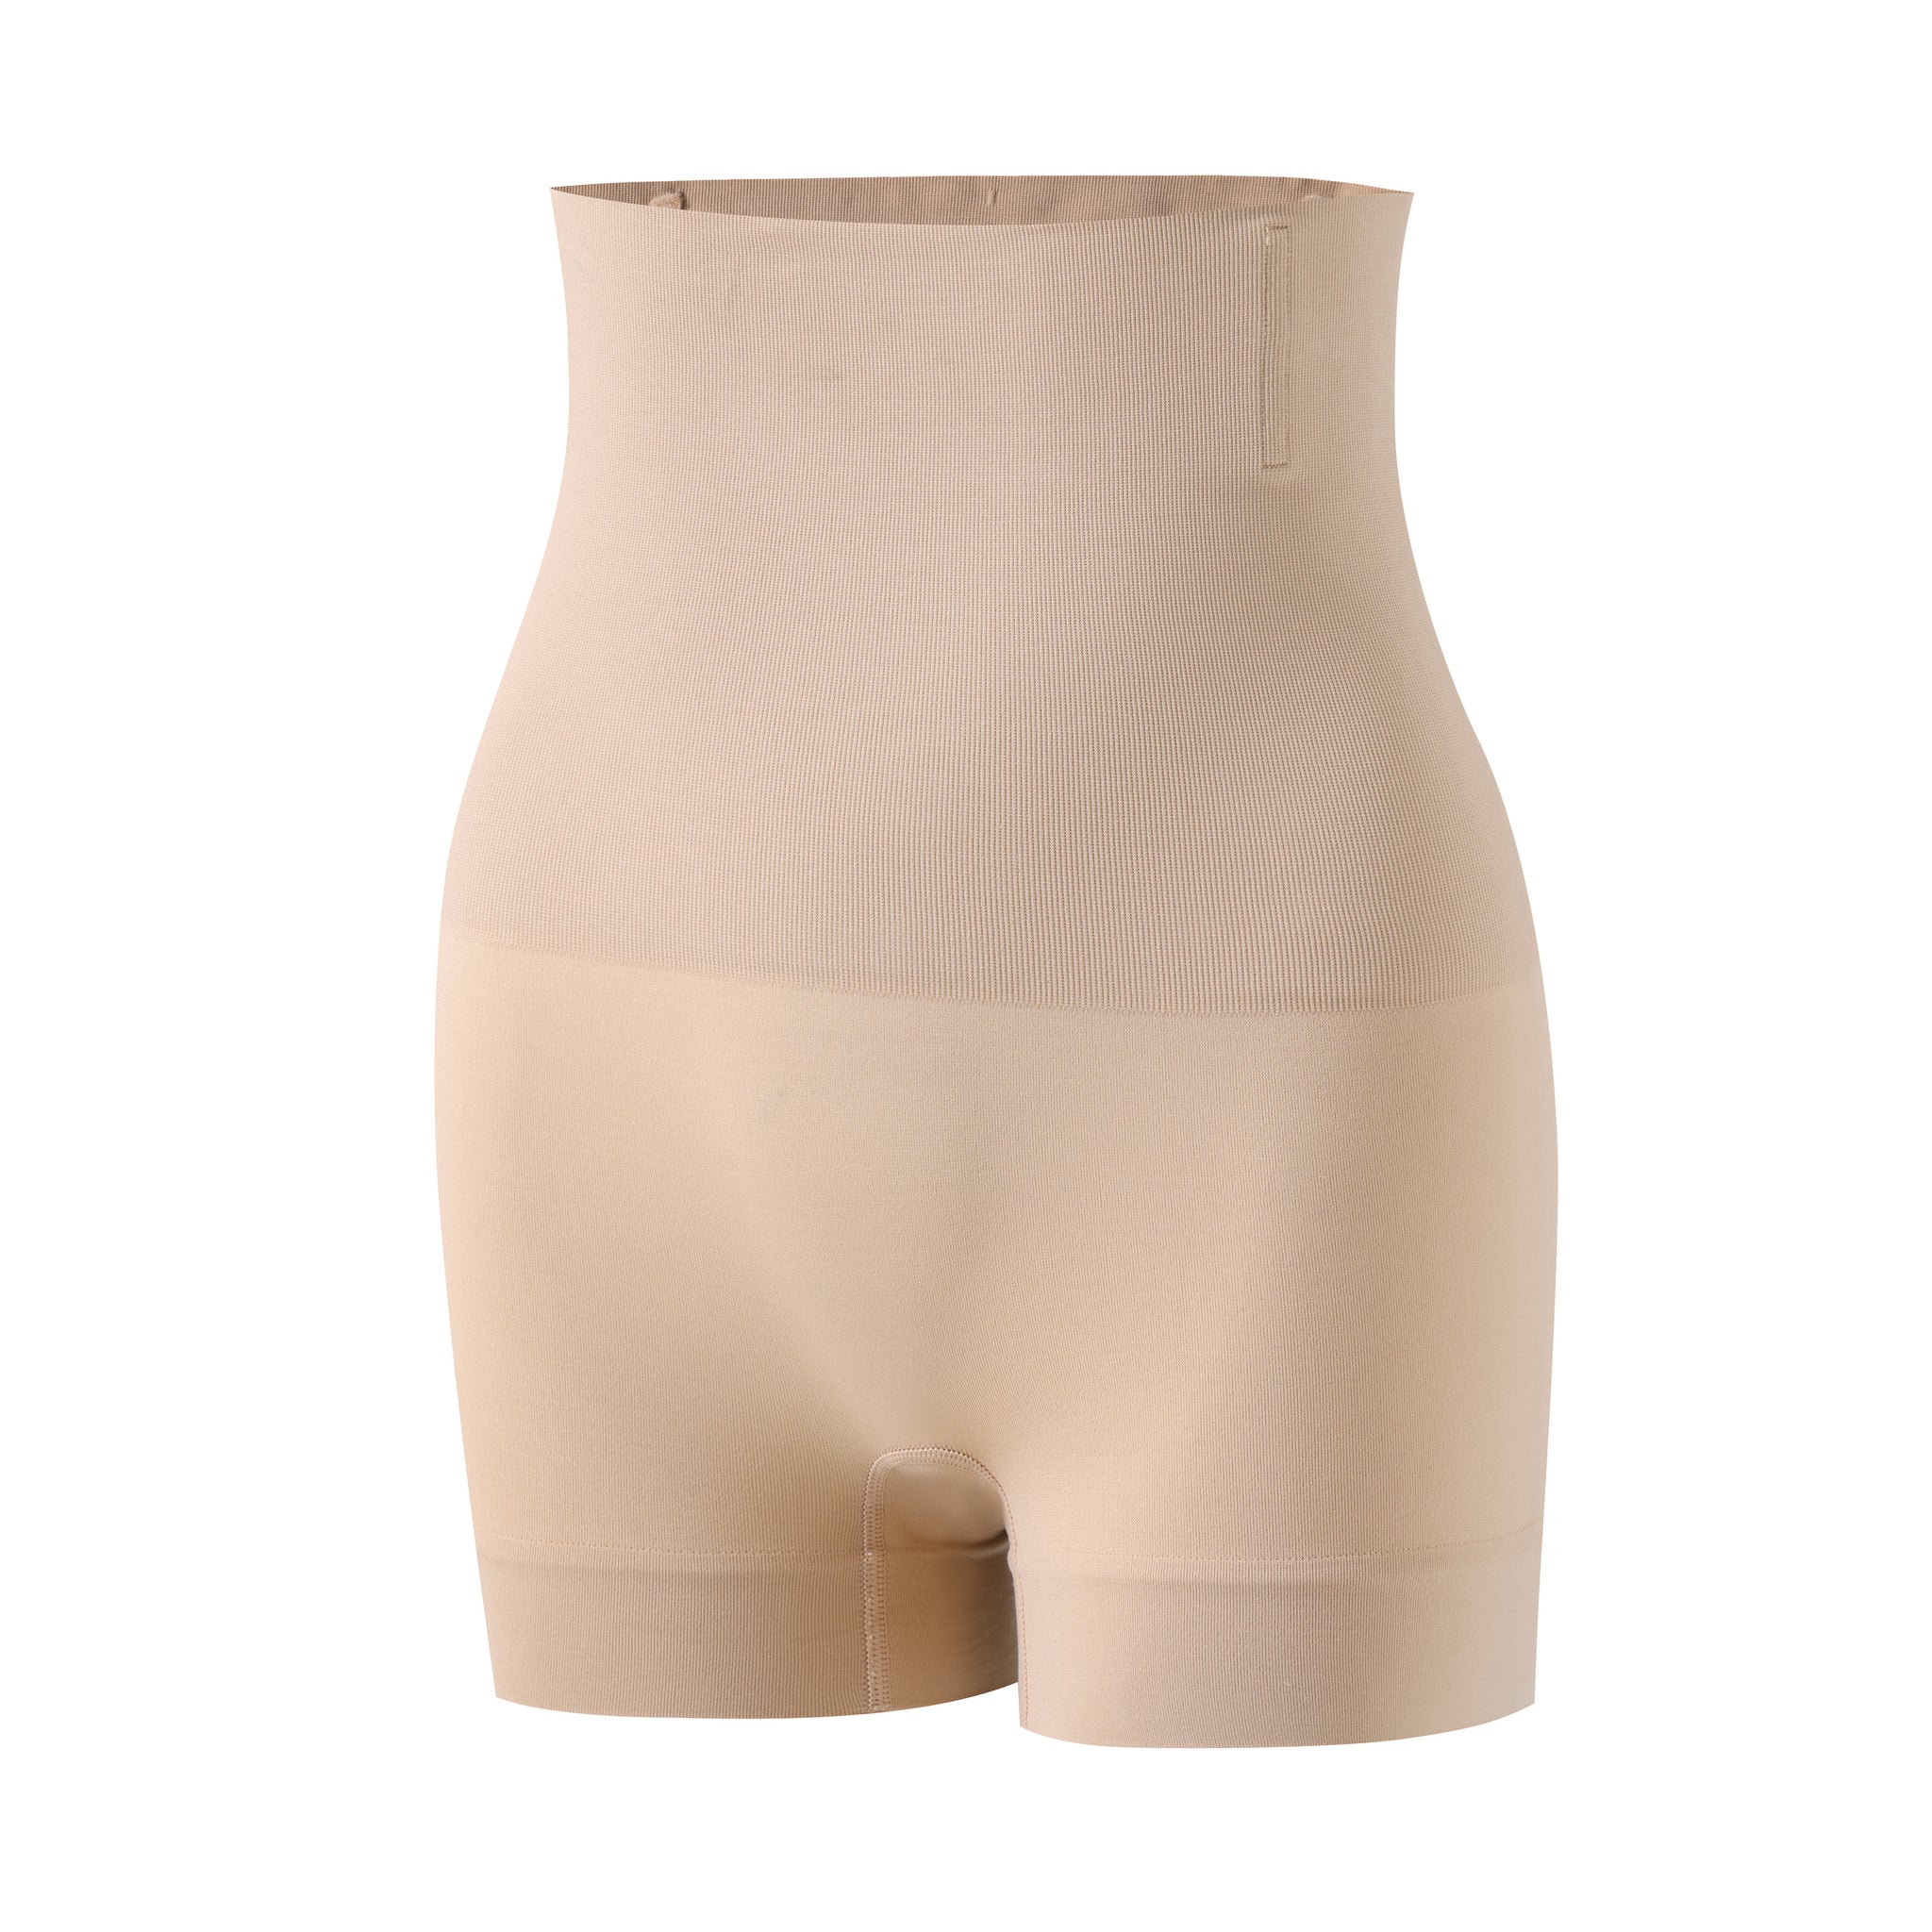 WERENA nude beige MID HIGH WAISTED THONG SHAPEWEAR panty size small NWT